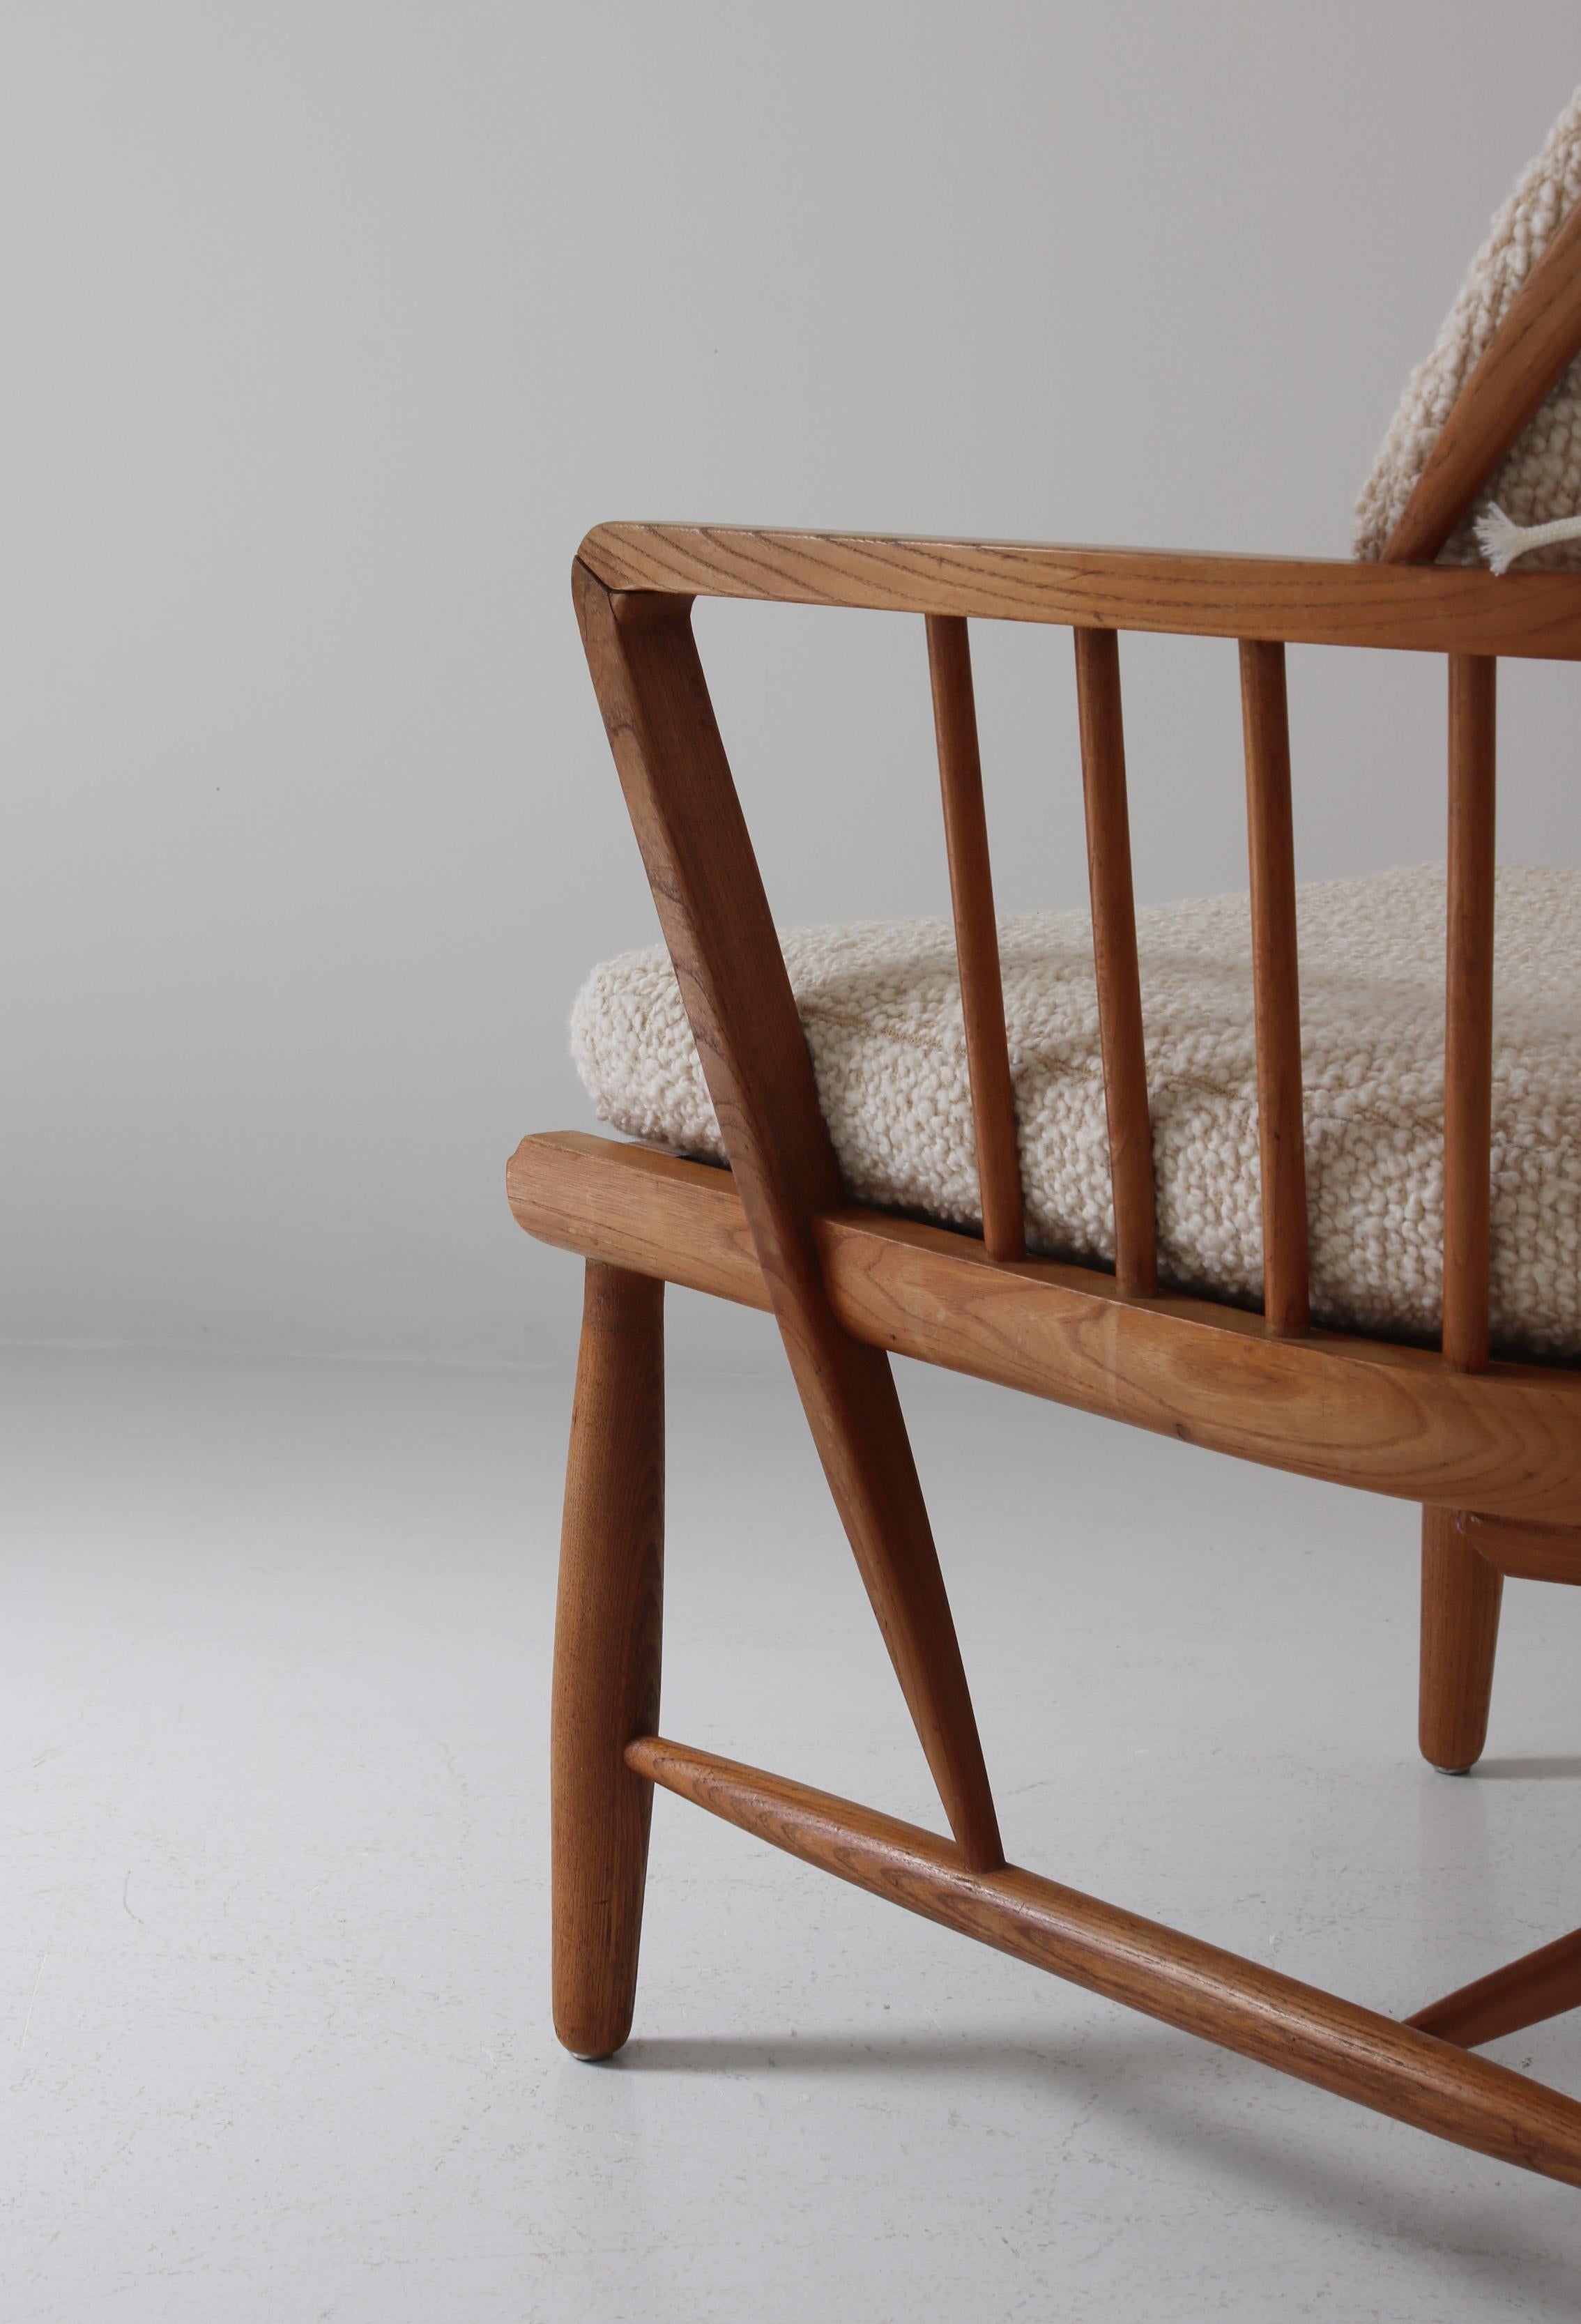 Scandinavian Modern Windsor Chair in Patinated Ash and White Bouclé, 1940s For Sale 9